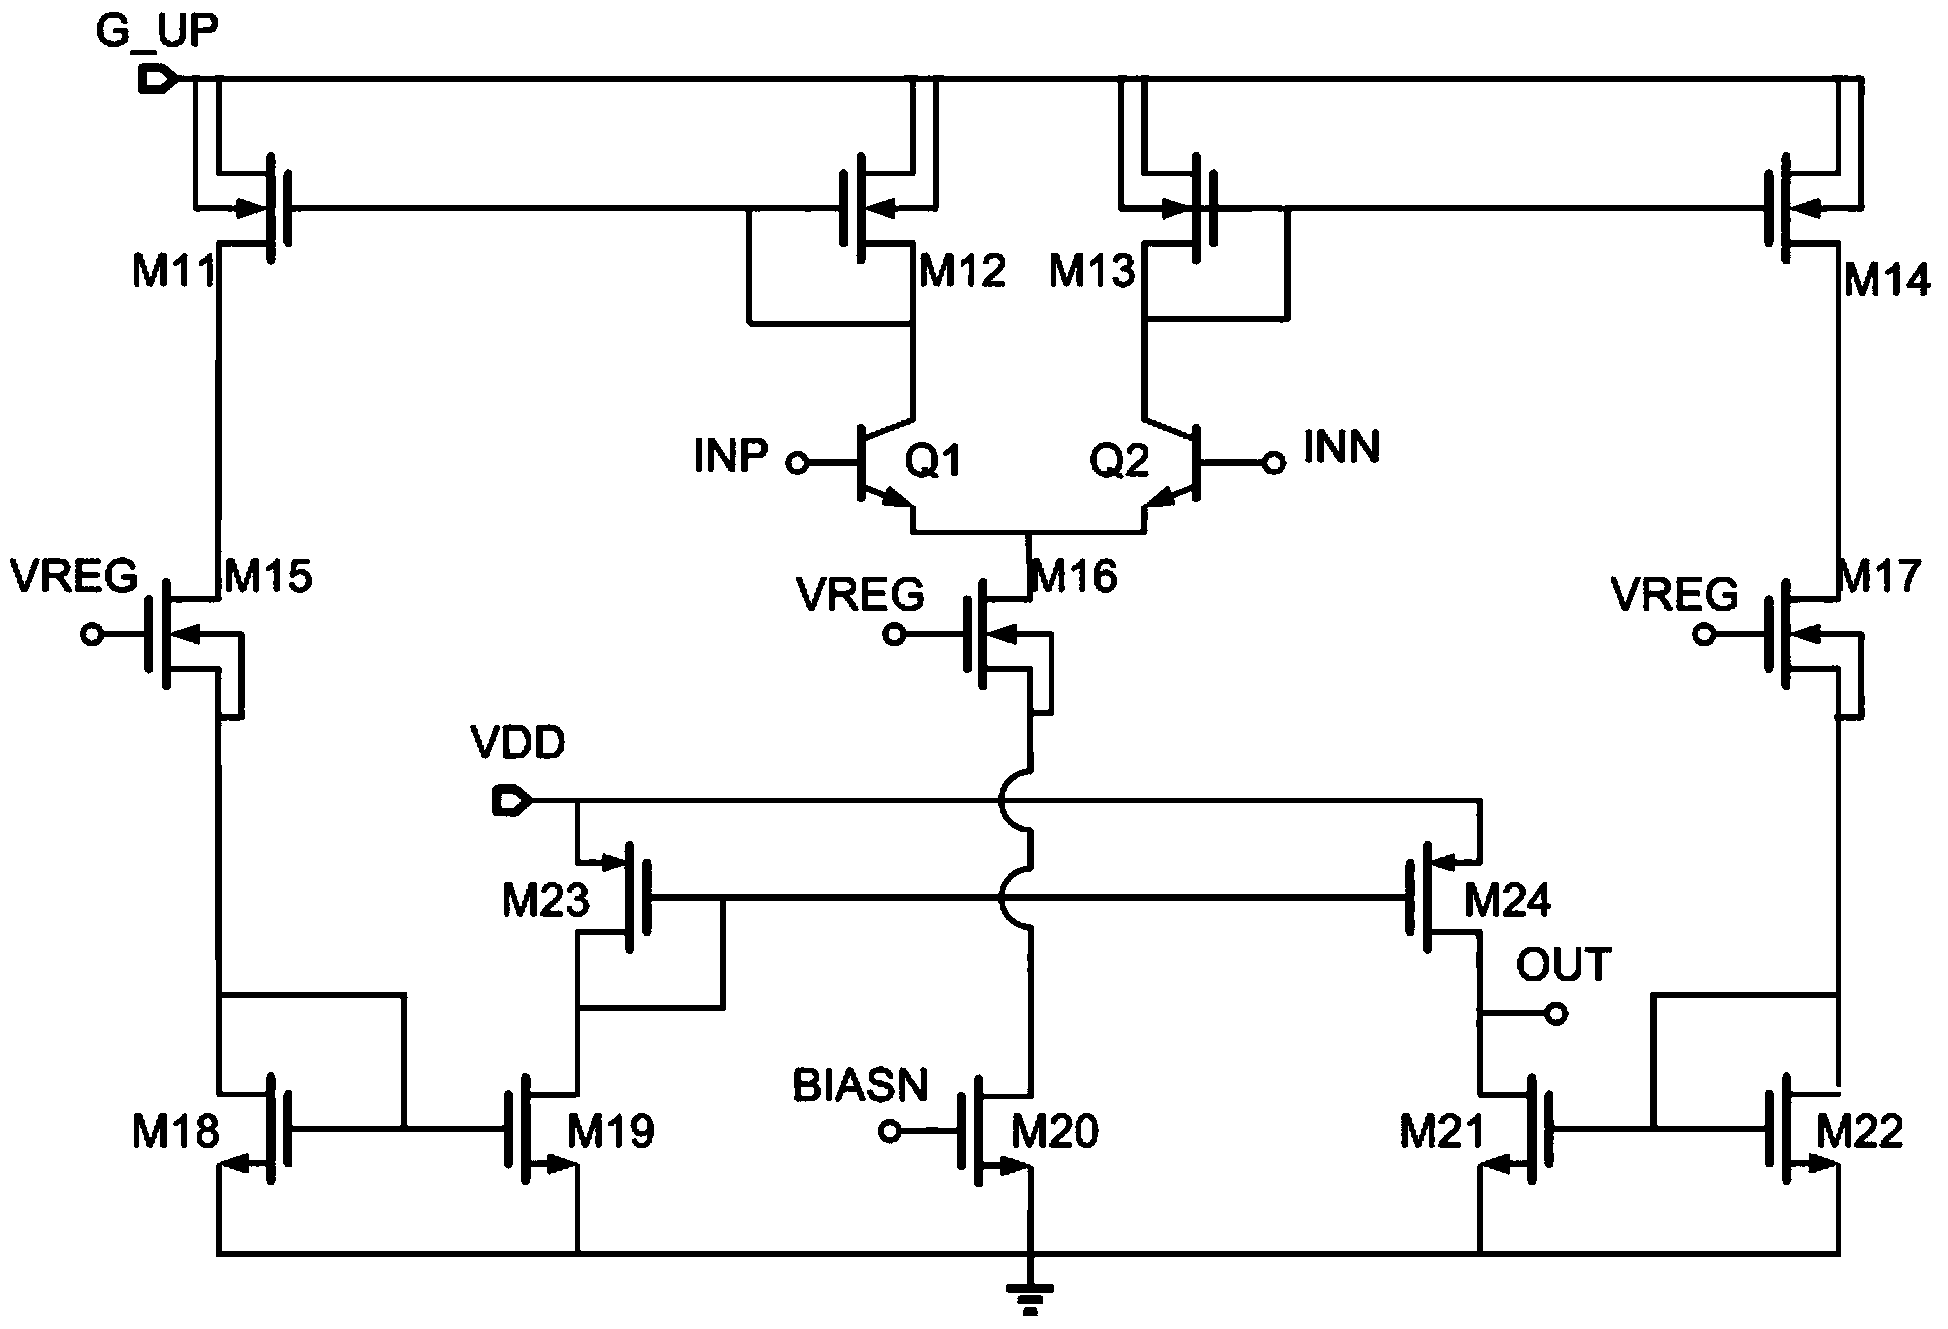 Overcurrent protection detection circuit applied to high-power motor drive chips